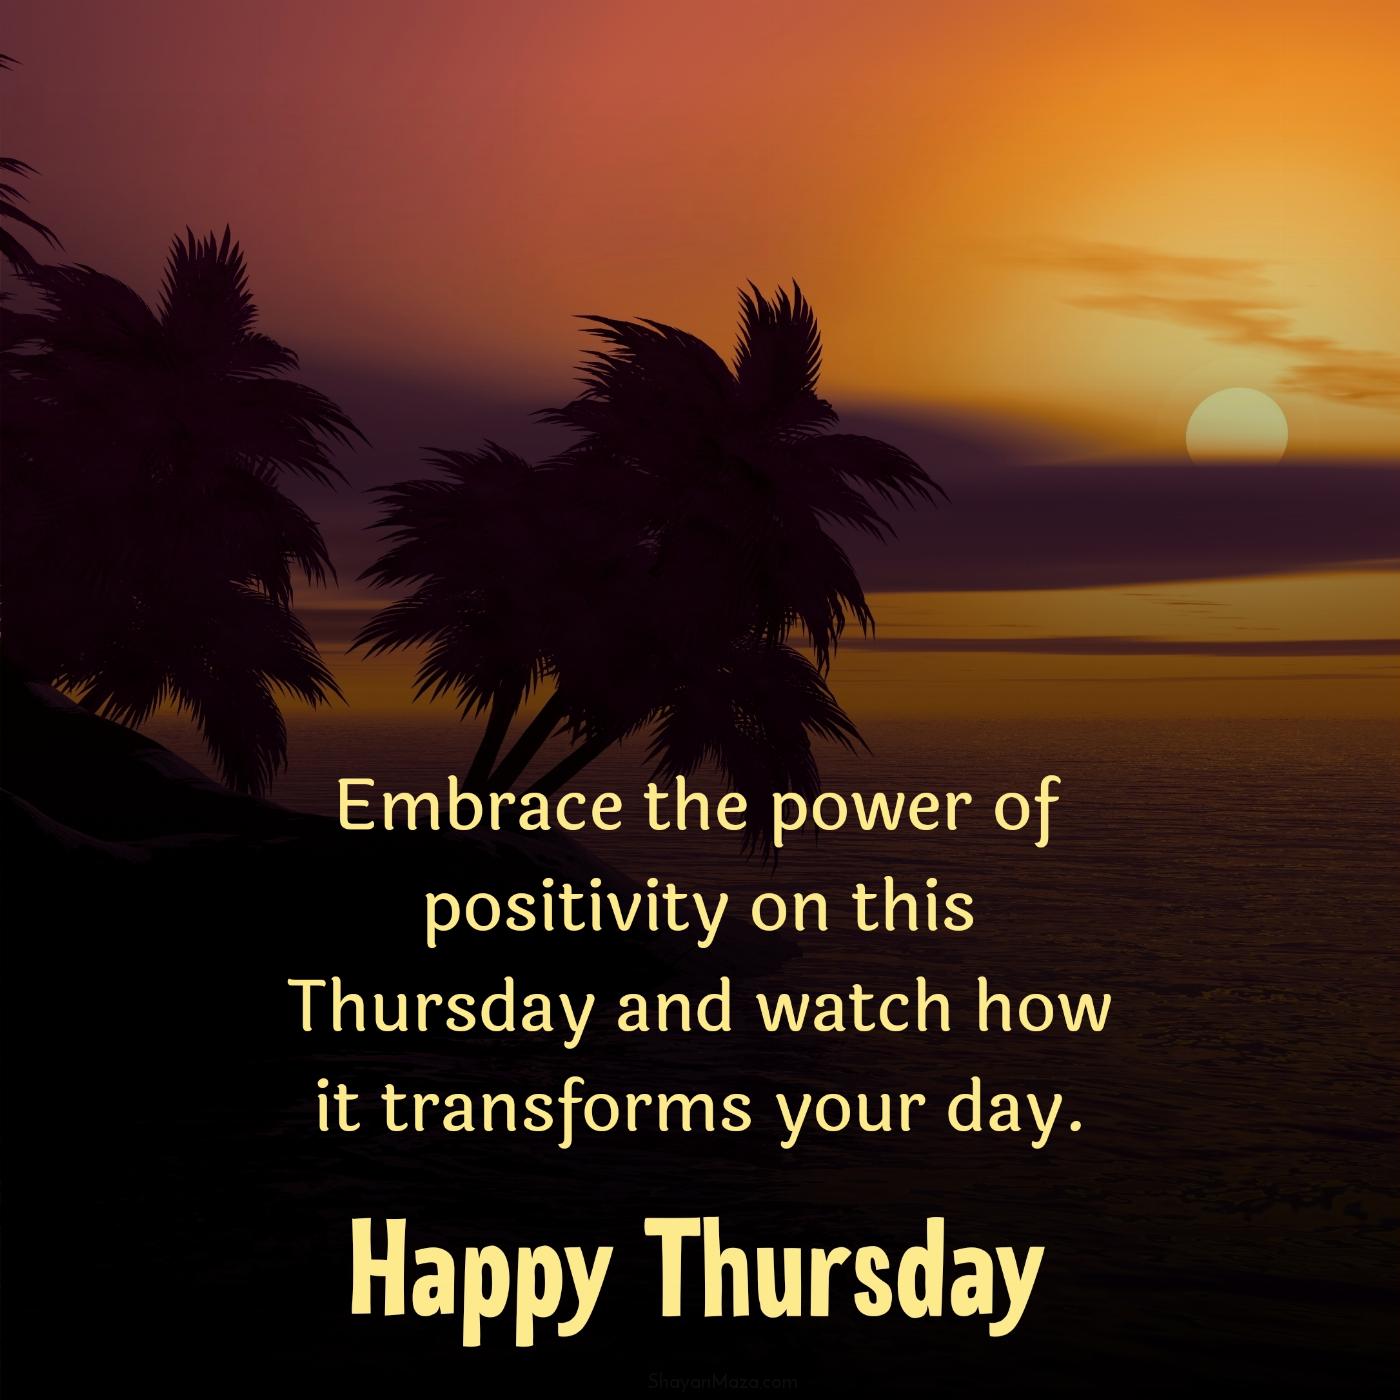 Embrace the power of positivity on this Thursday